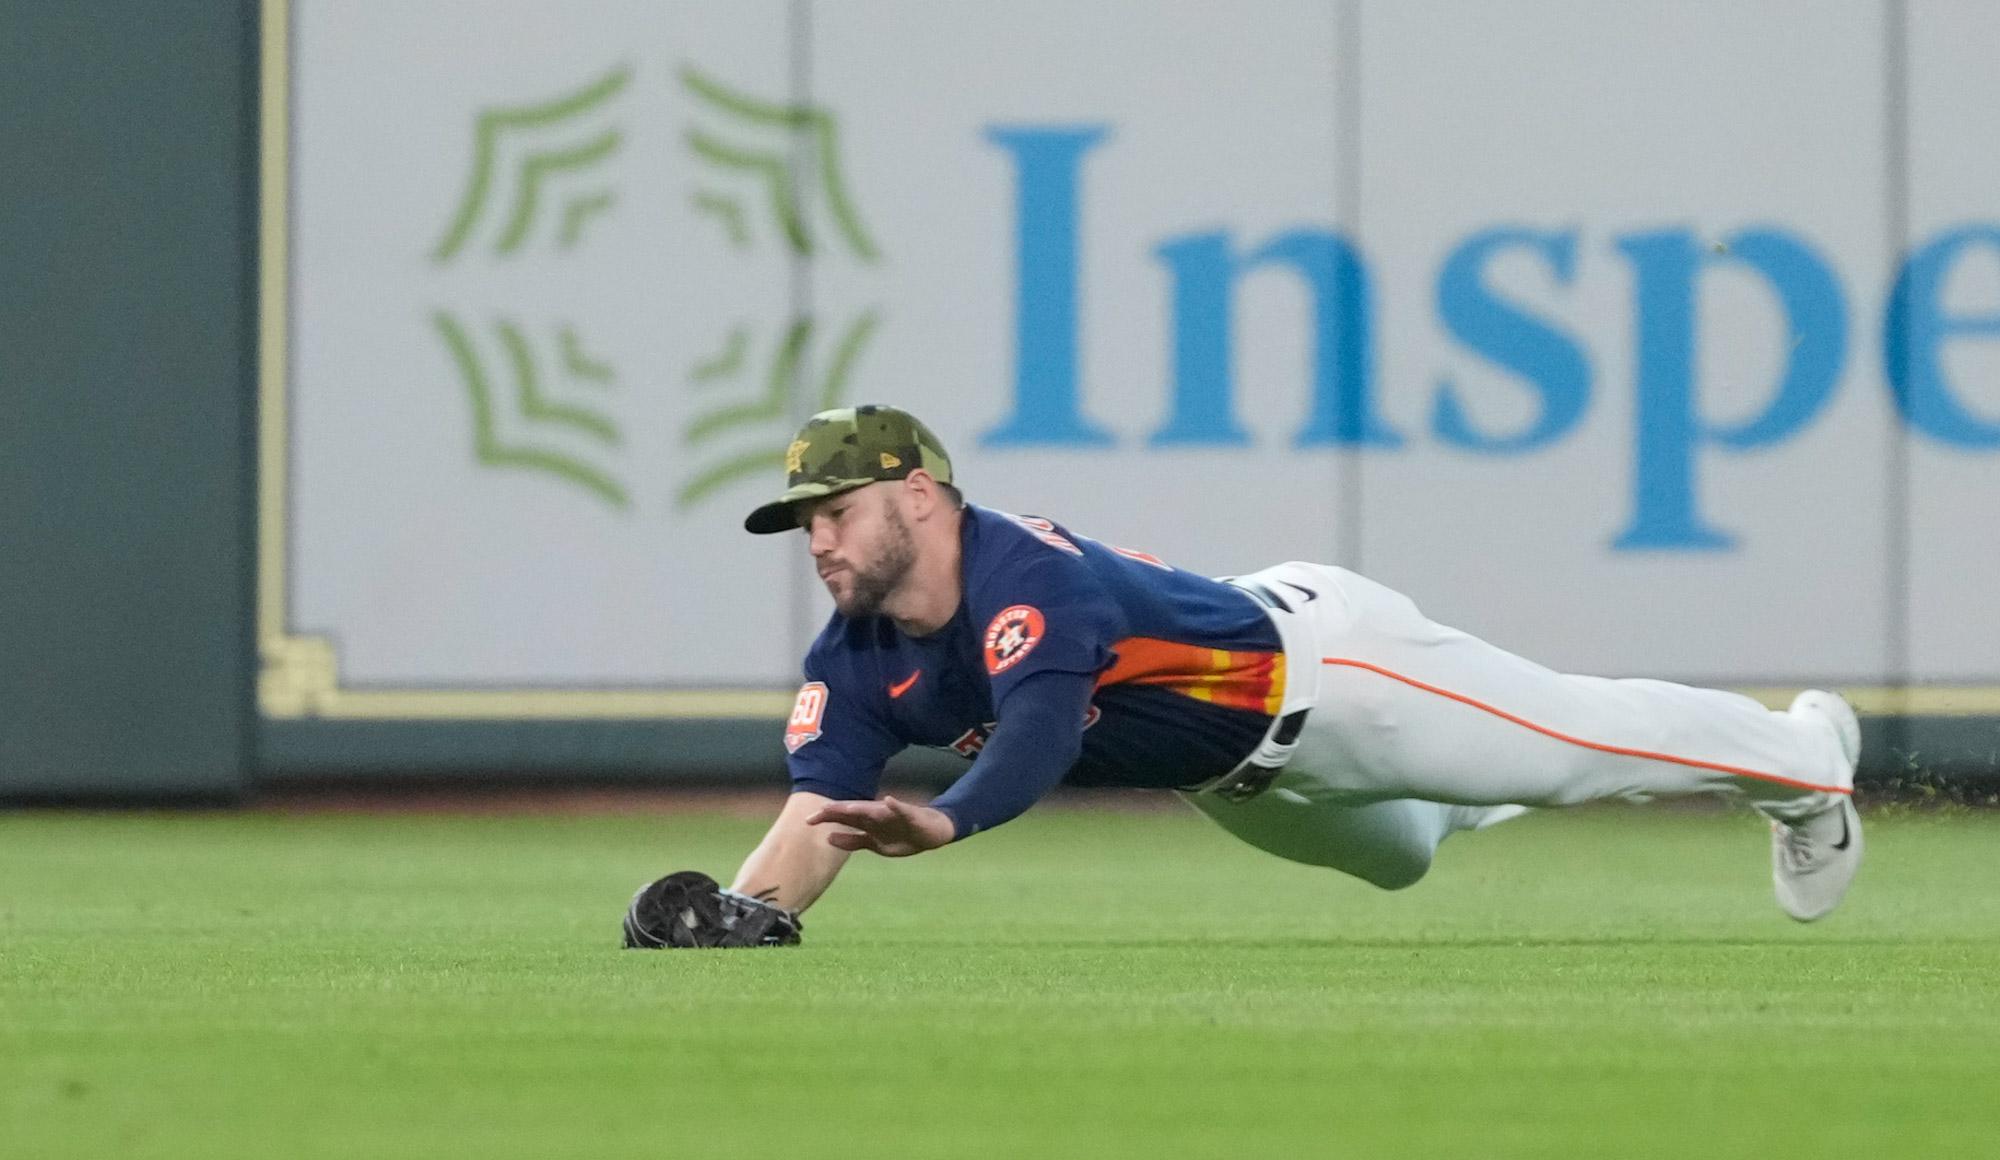 Chas McCormick gets another chance to show Astros he belongs